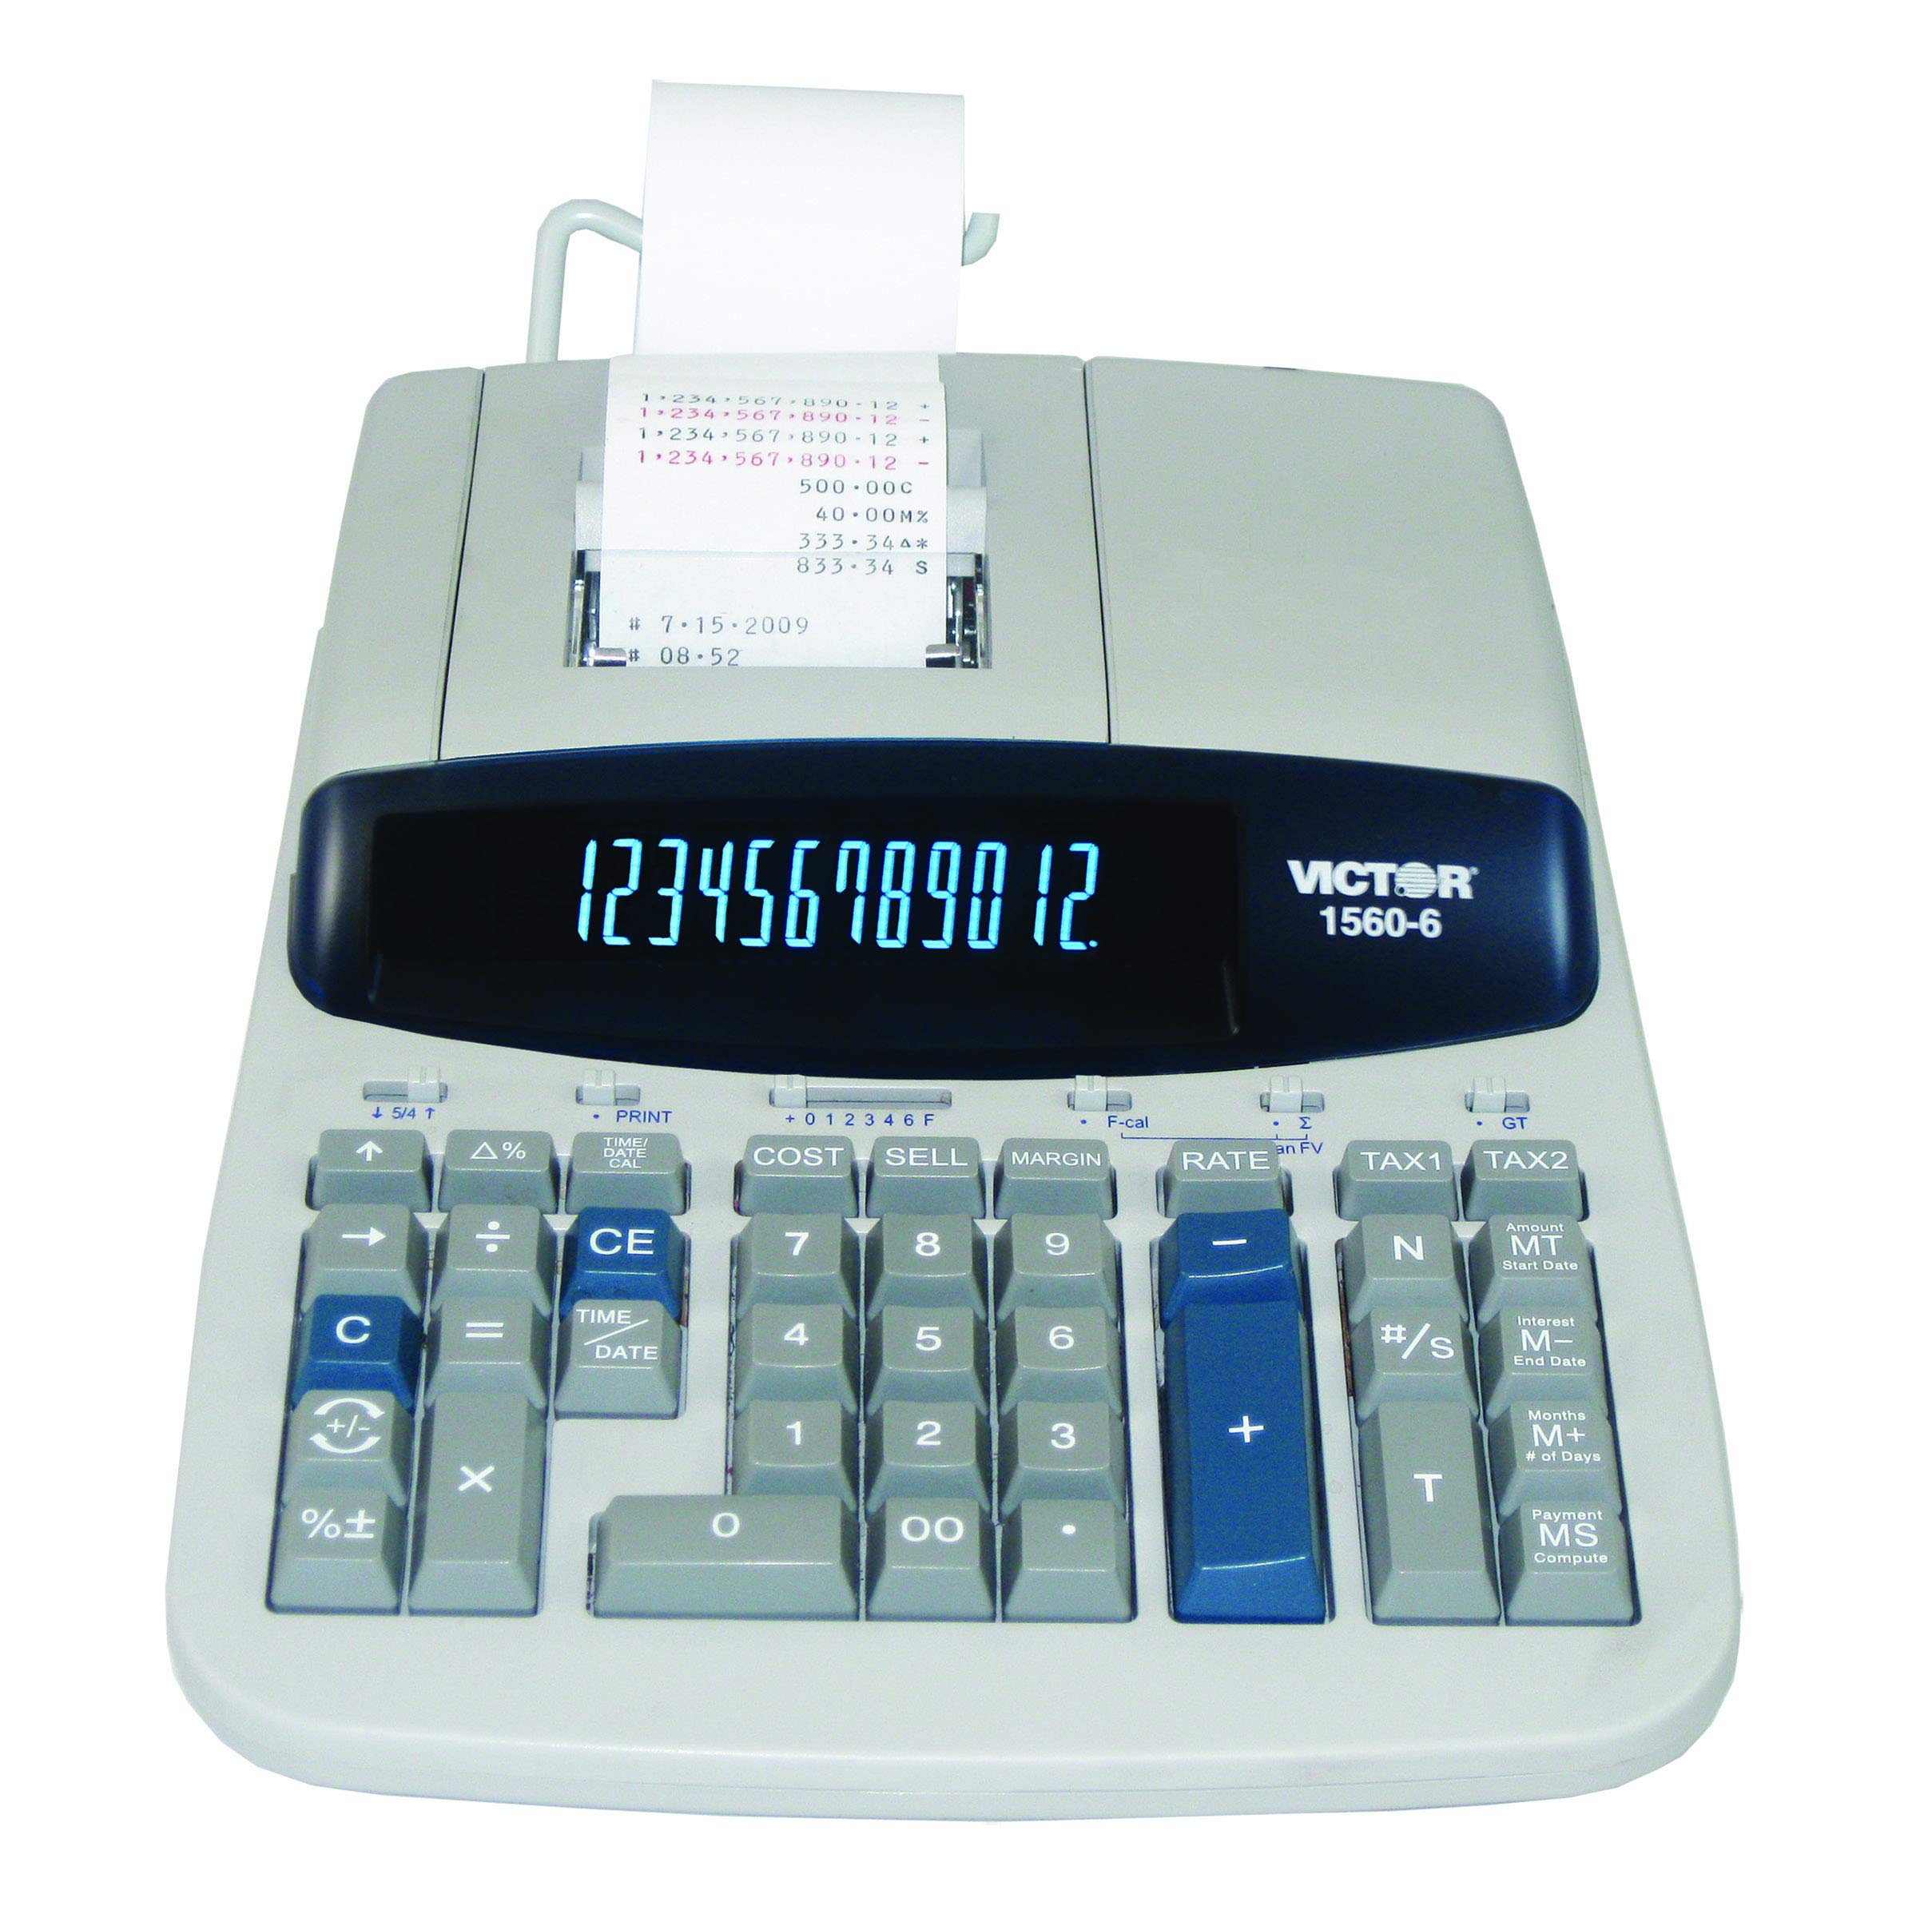 Victor 1560-6 12 Digit Heavy Duty Commercial Printing Calculator with Large Display and Loan Wizard